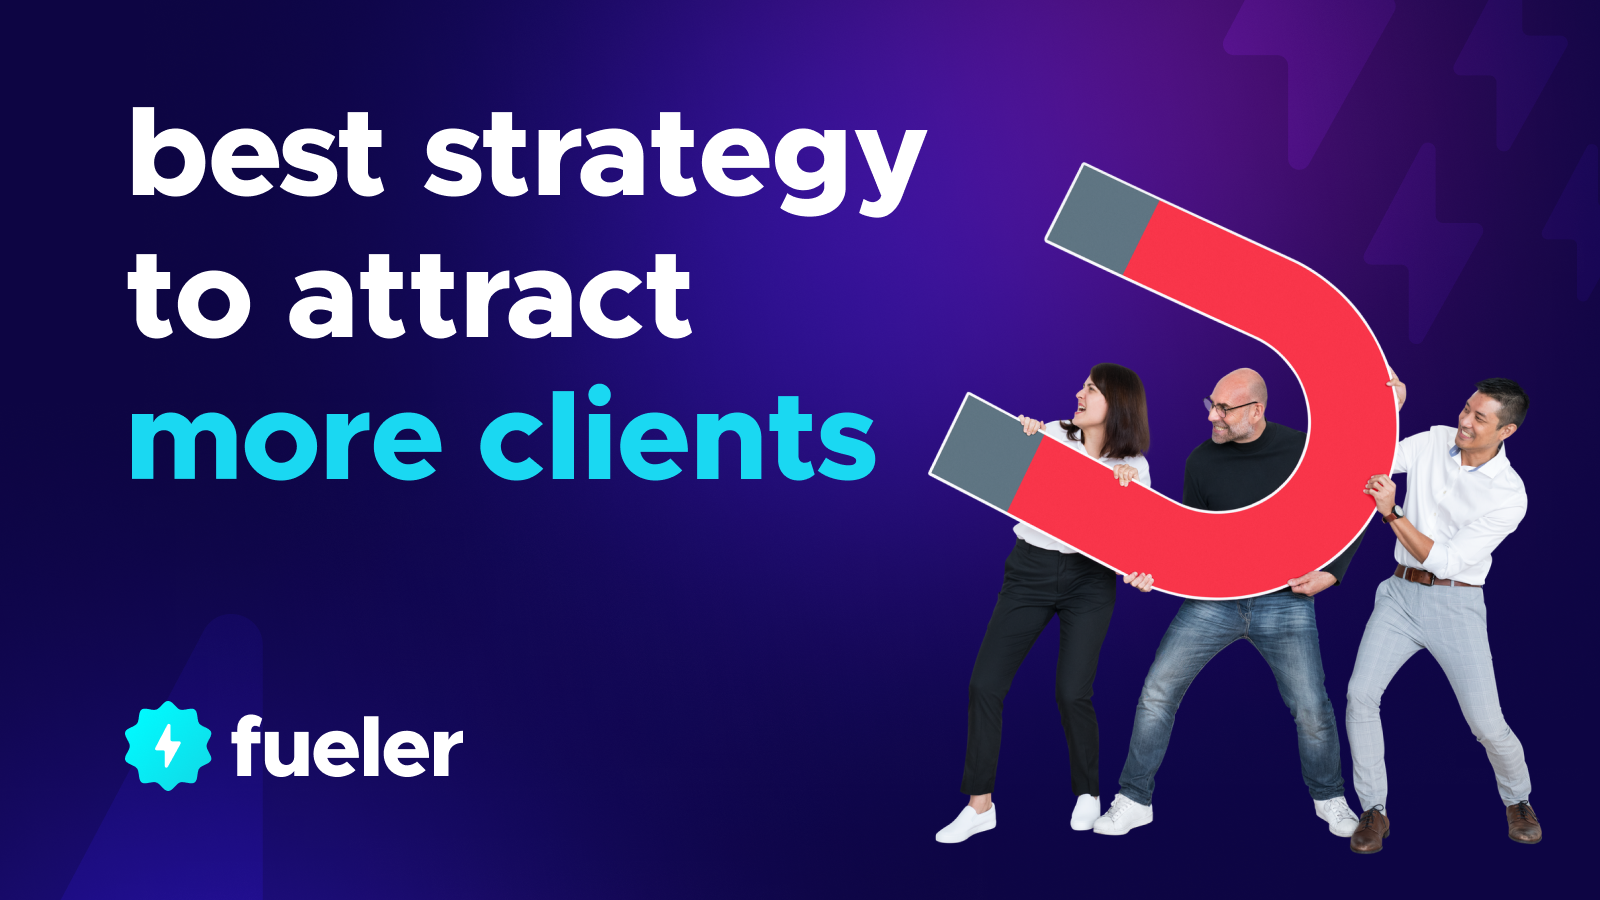 What is the best strategy to attract more clients?